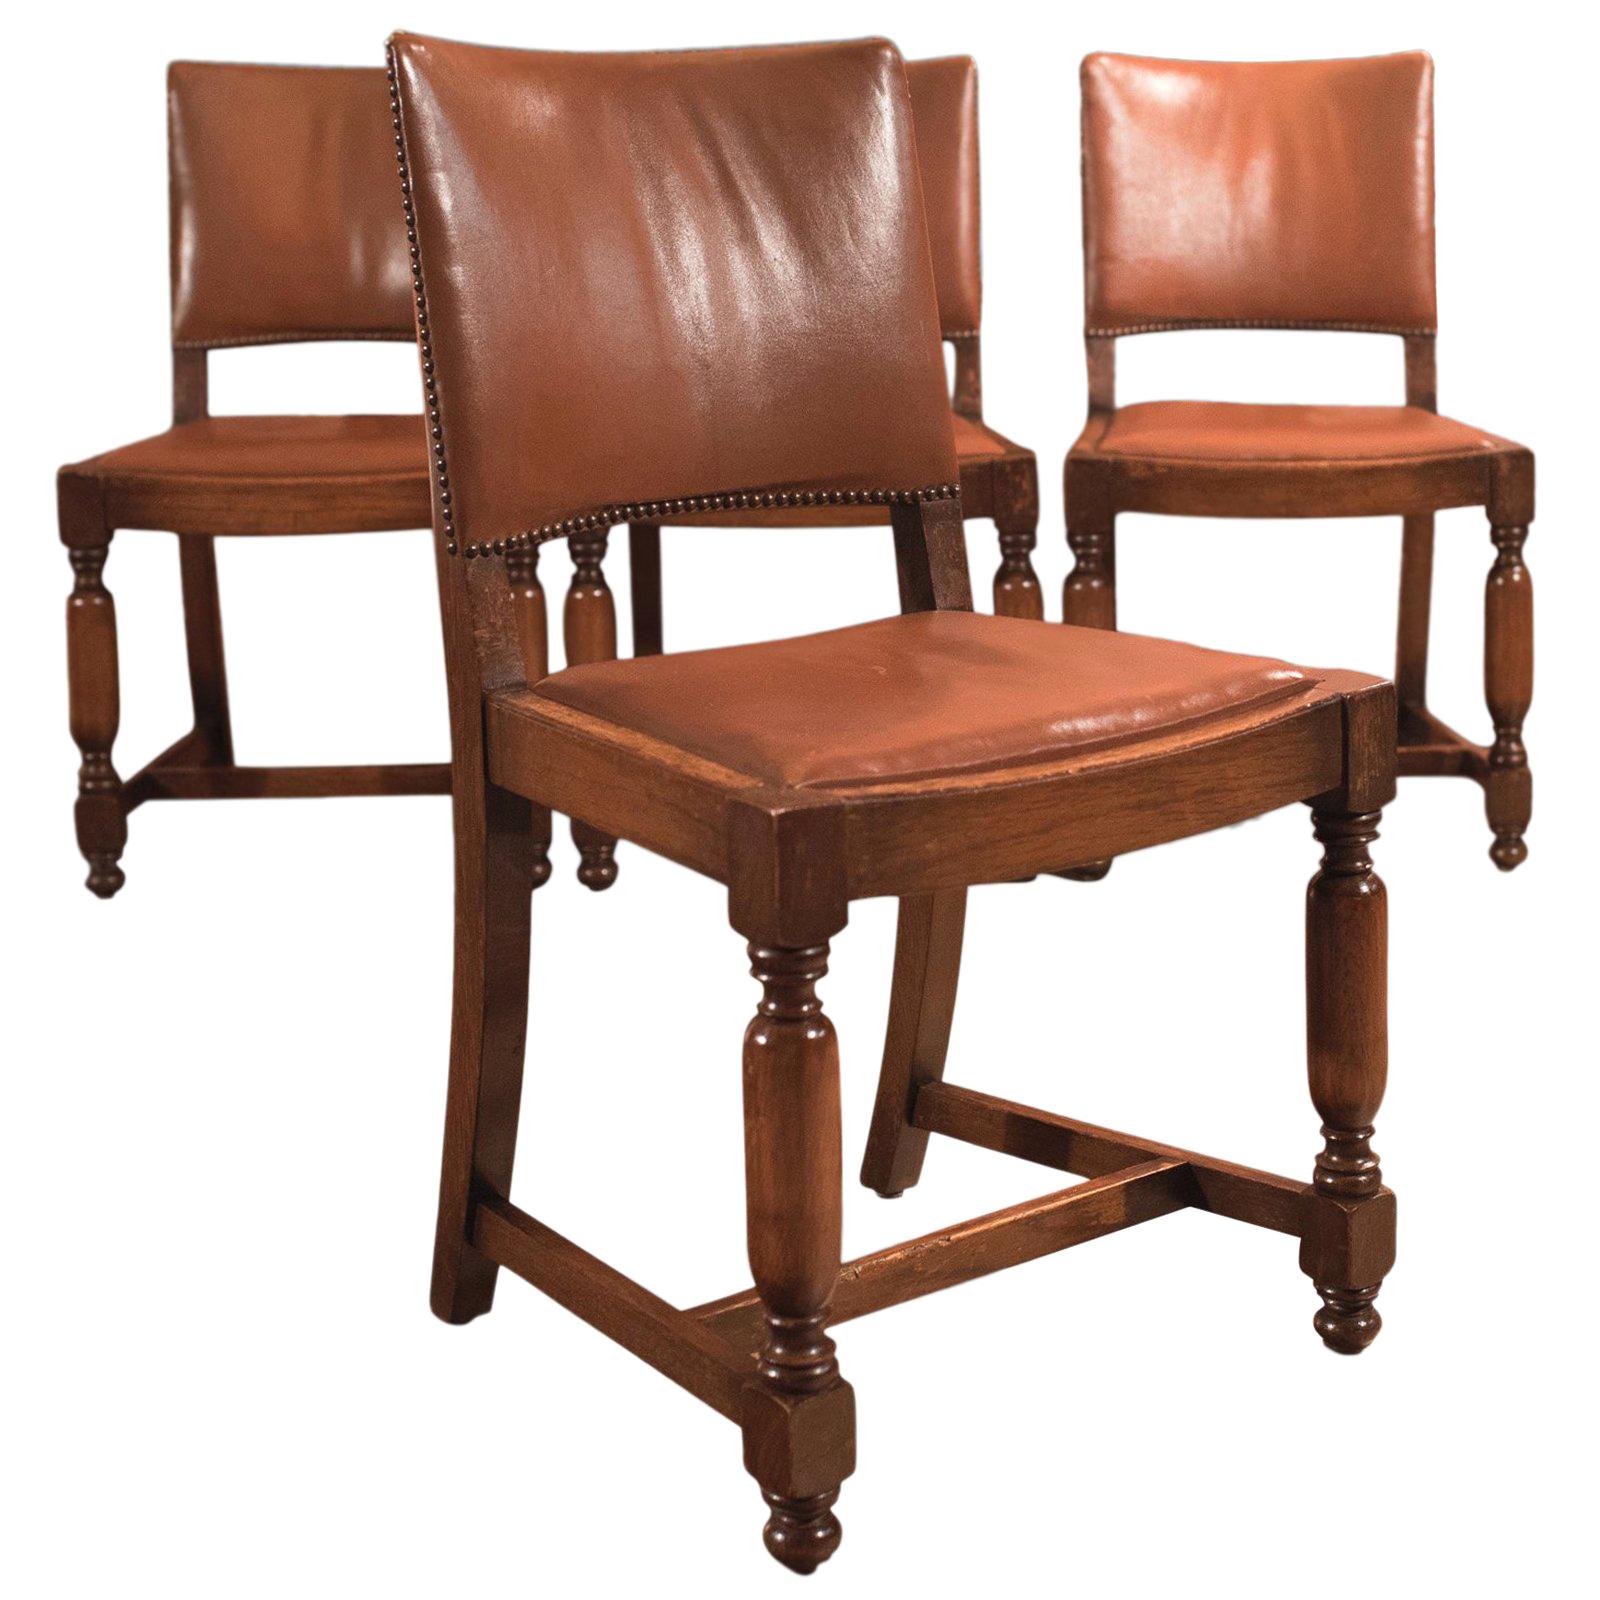 Set of Four Antique Dining Chairs, Edwardian Oak and Leather, circa 1910